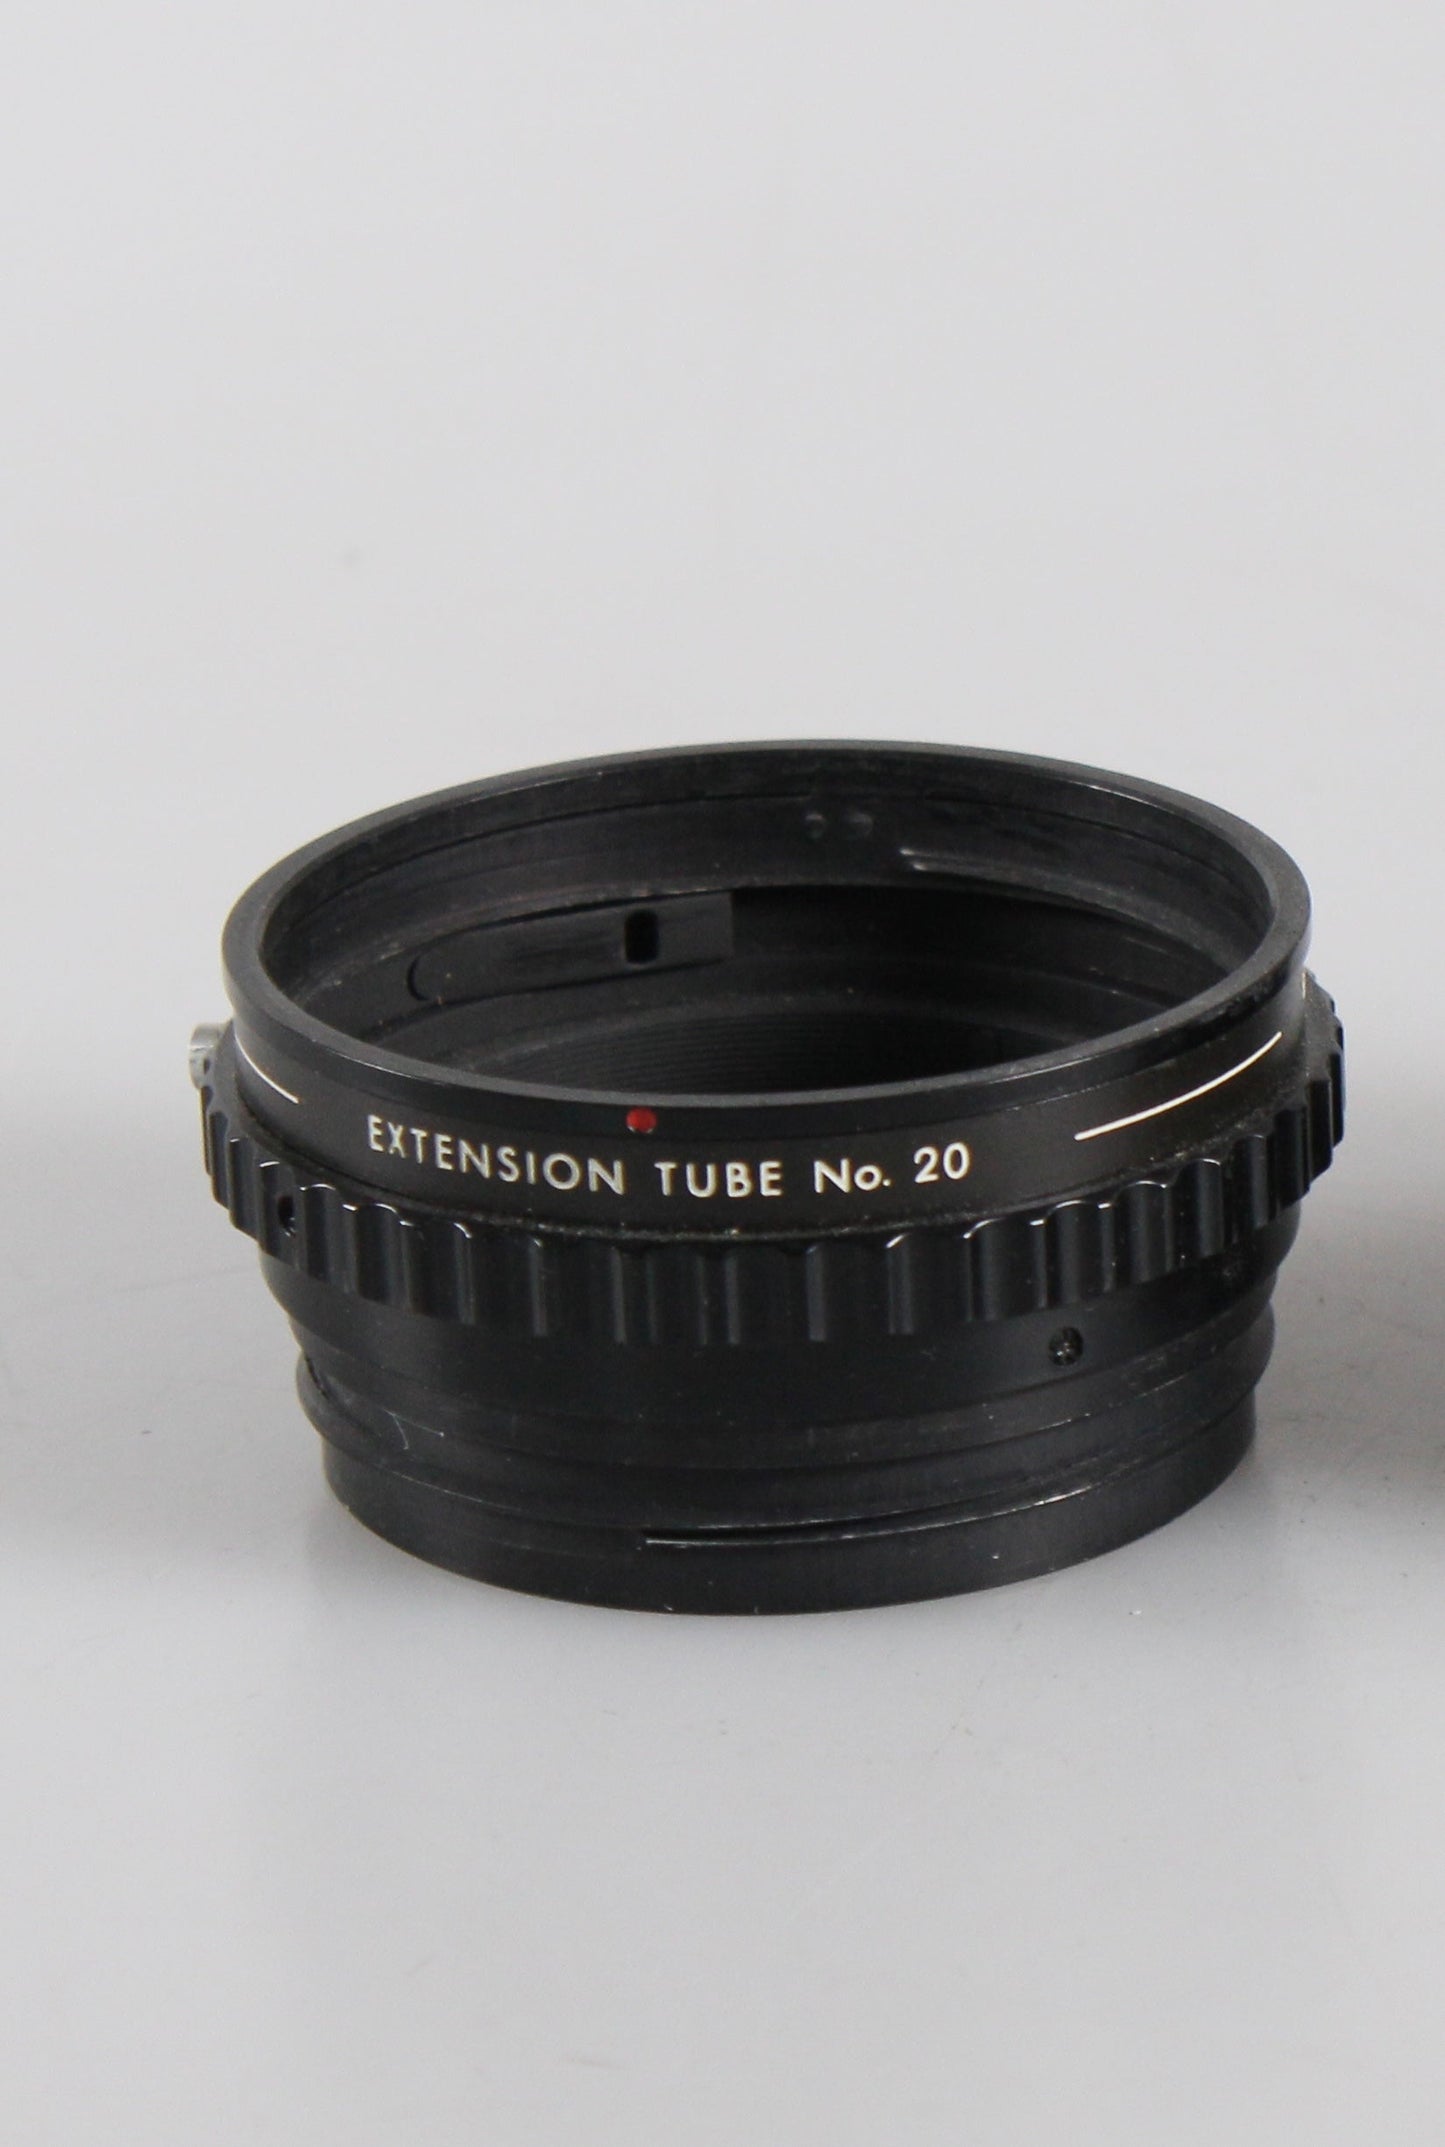 Hasselblad extension tube 20 for 1000F 1600F